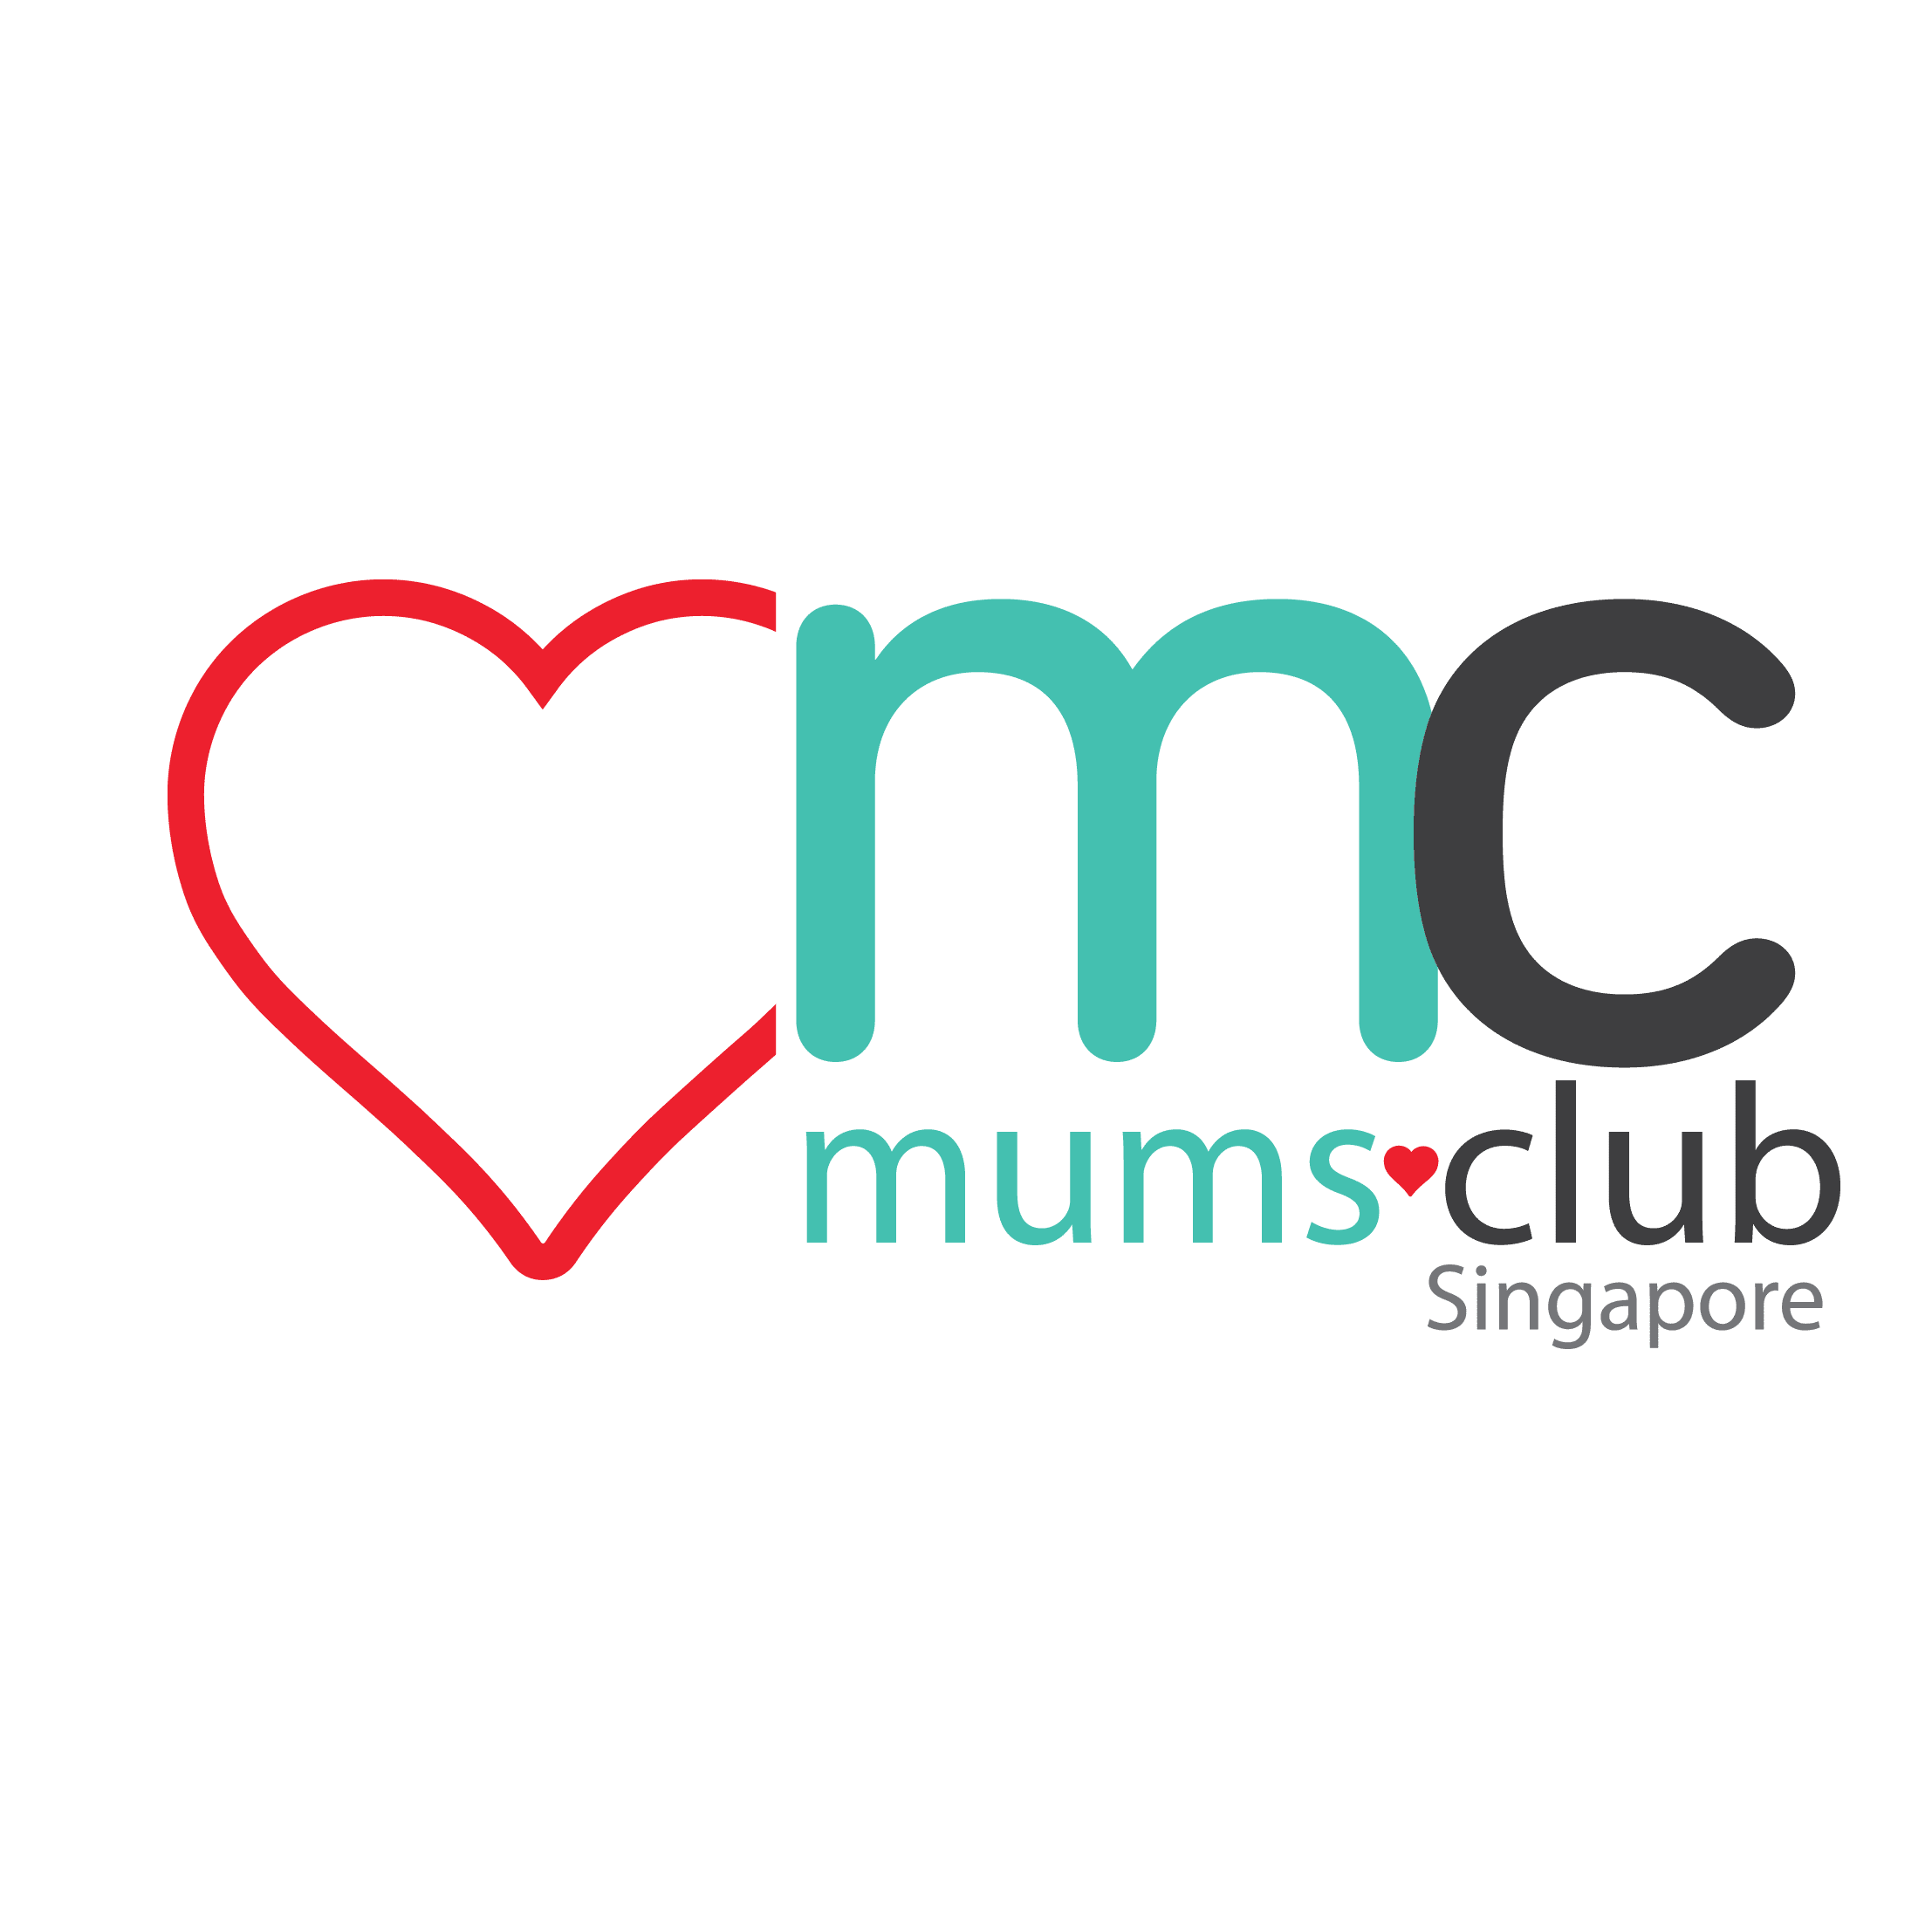 A Mothers Community Network